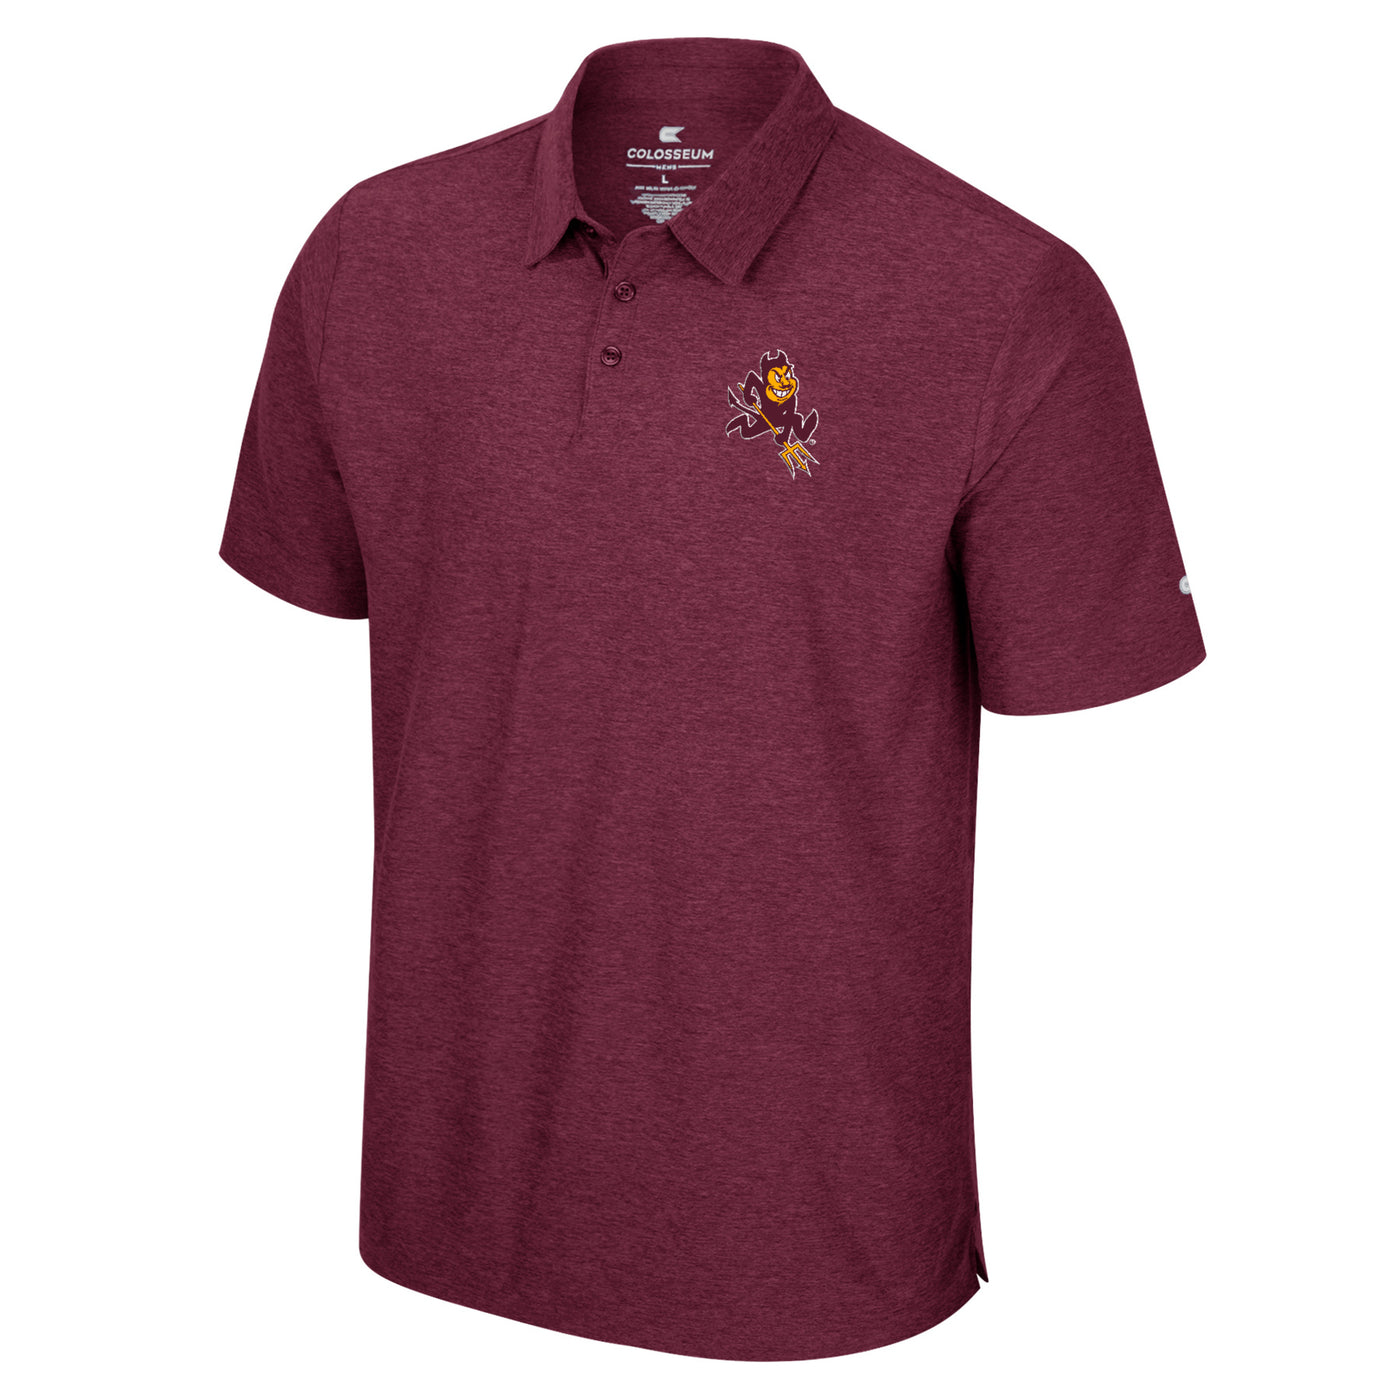 Mens maroon polo with small sparky mascot on chest.